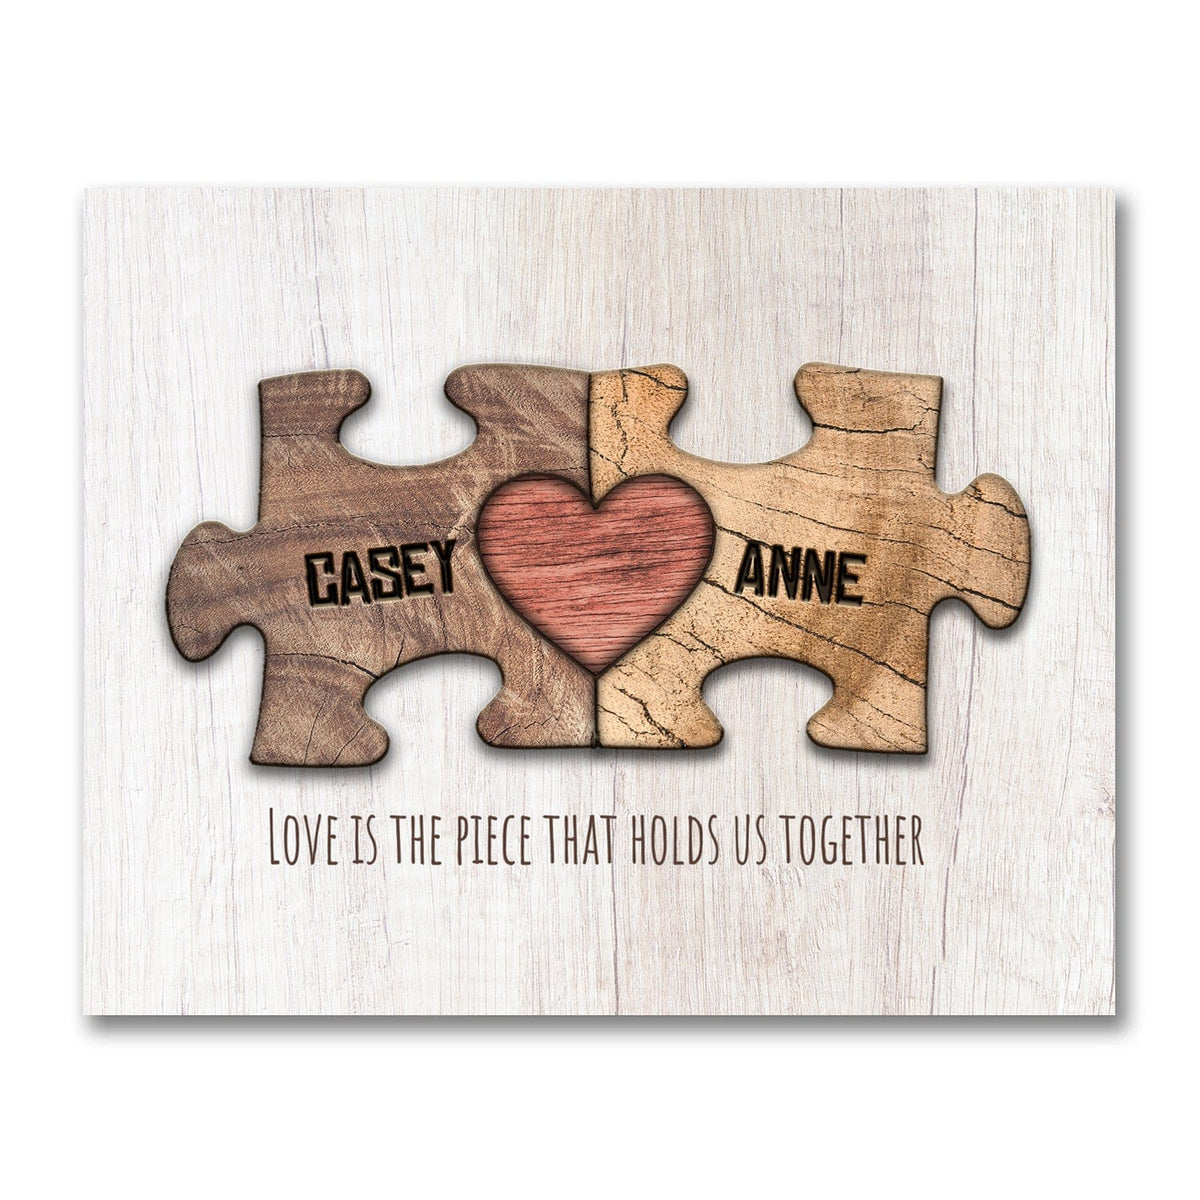 Personalized puzzle piece art from Personal Prints